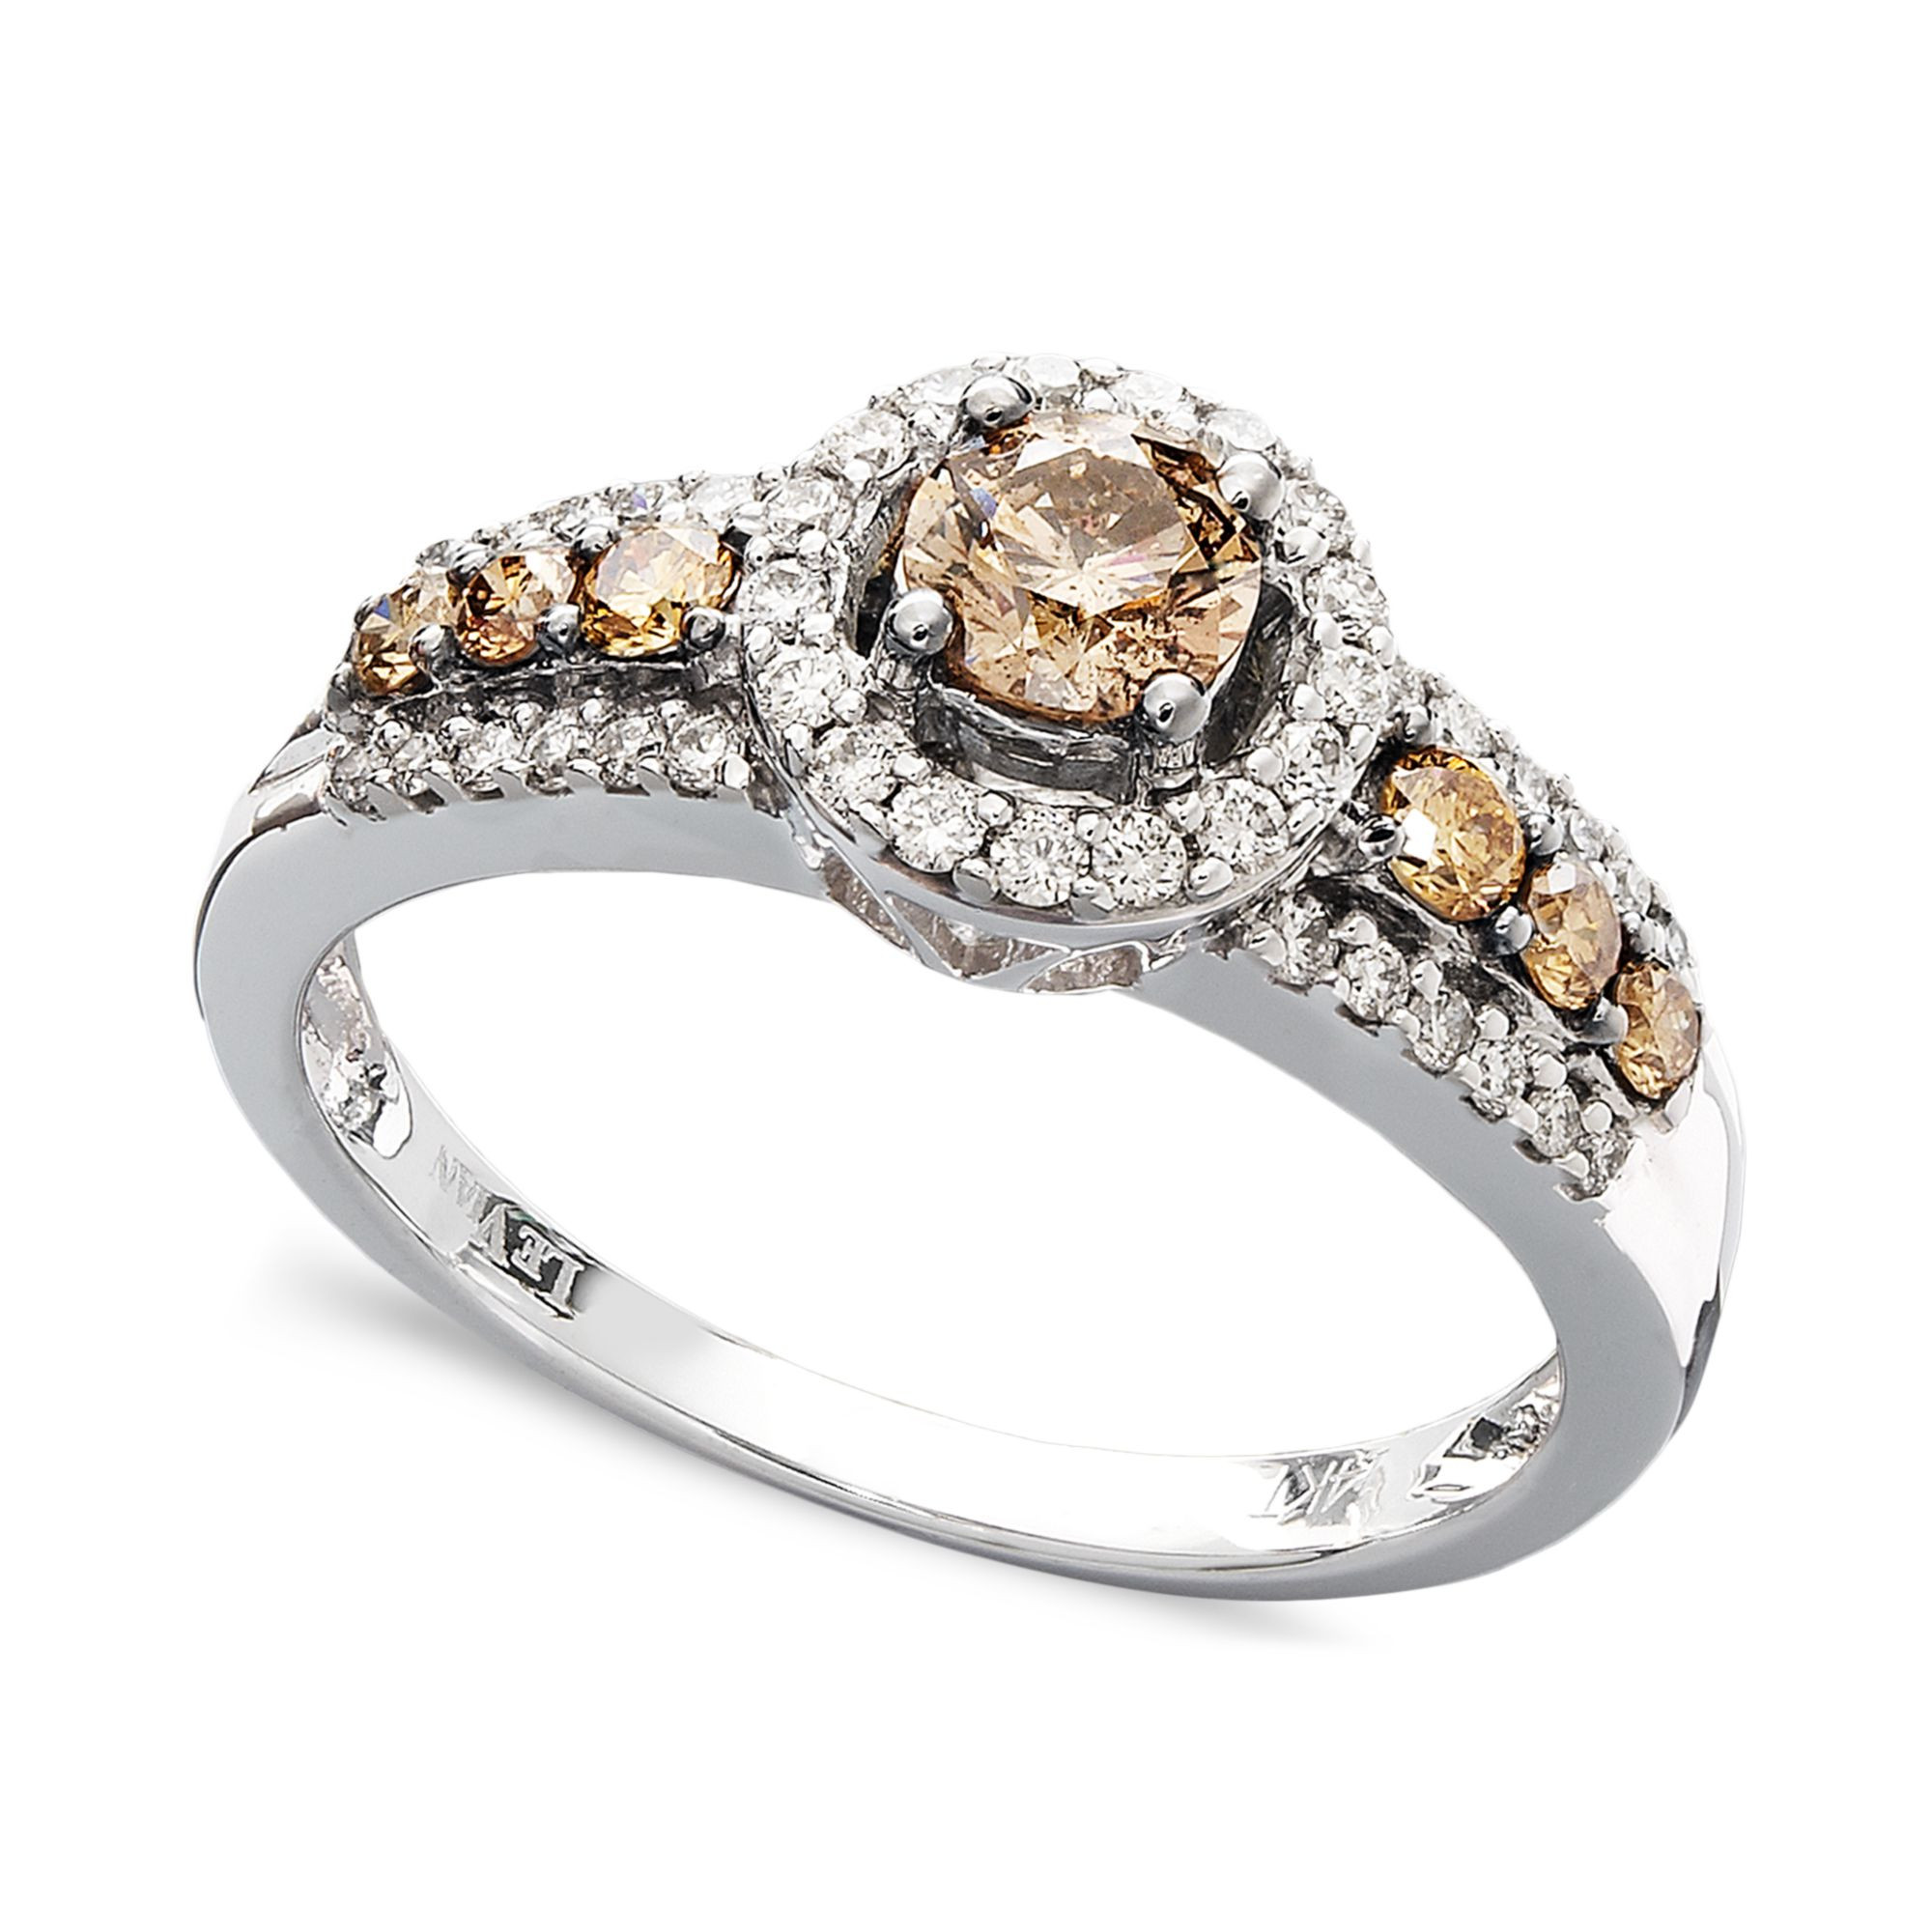 Chocolate Diamond Rings For Sale
 Le vian Chocolate And White Diamond Ring In 14k White Gold